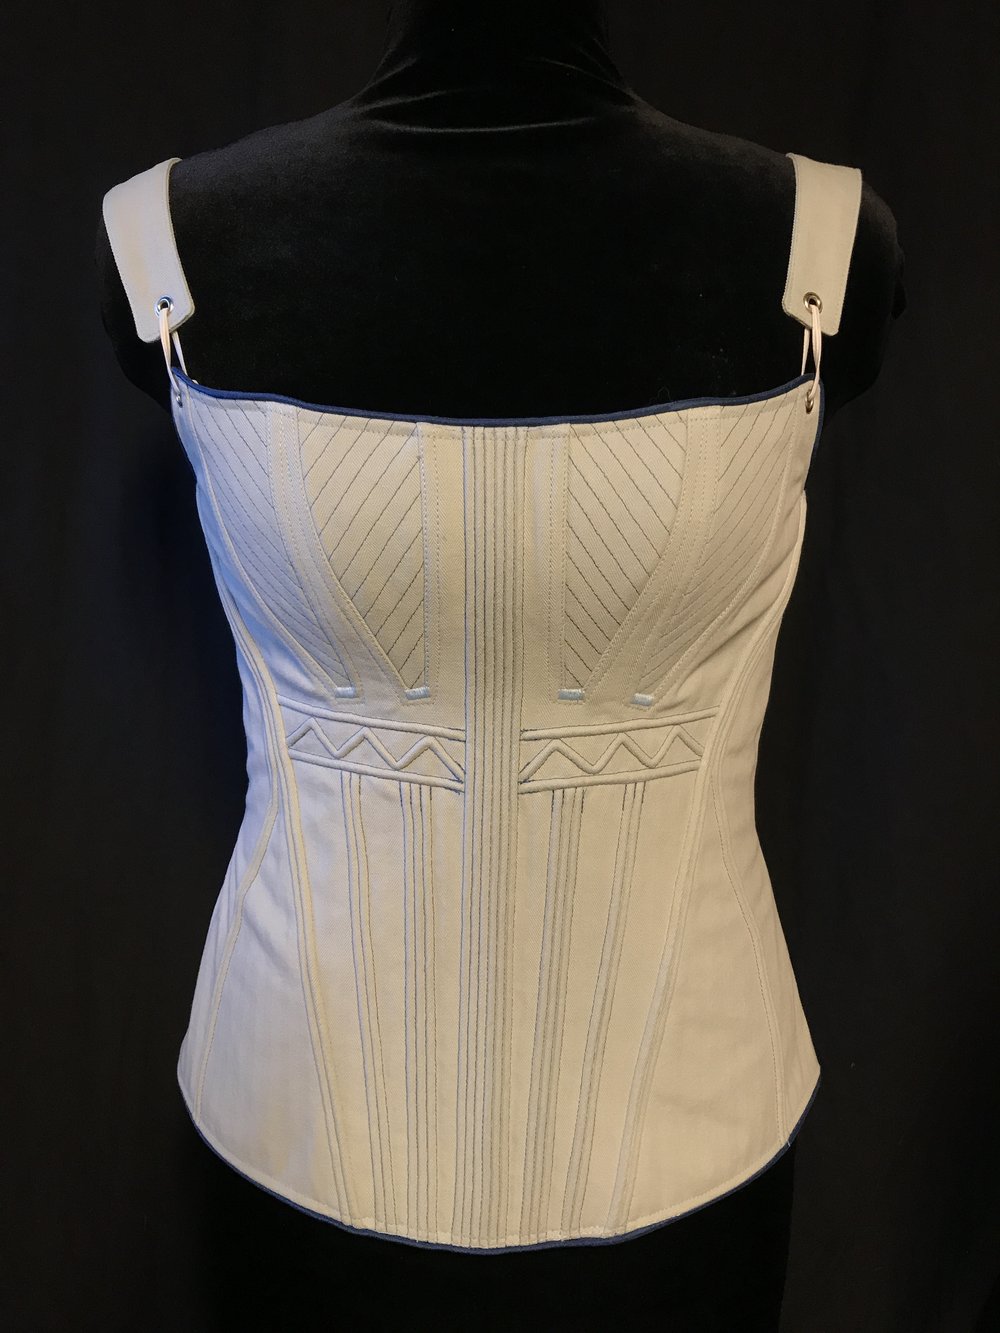 c. 1835 Corded Ada Stays — Period Corsets